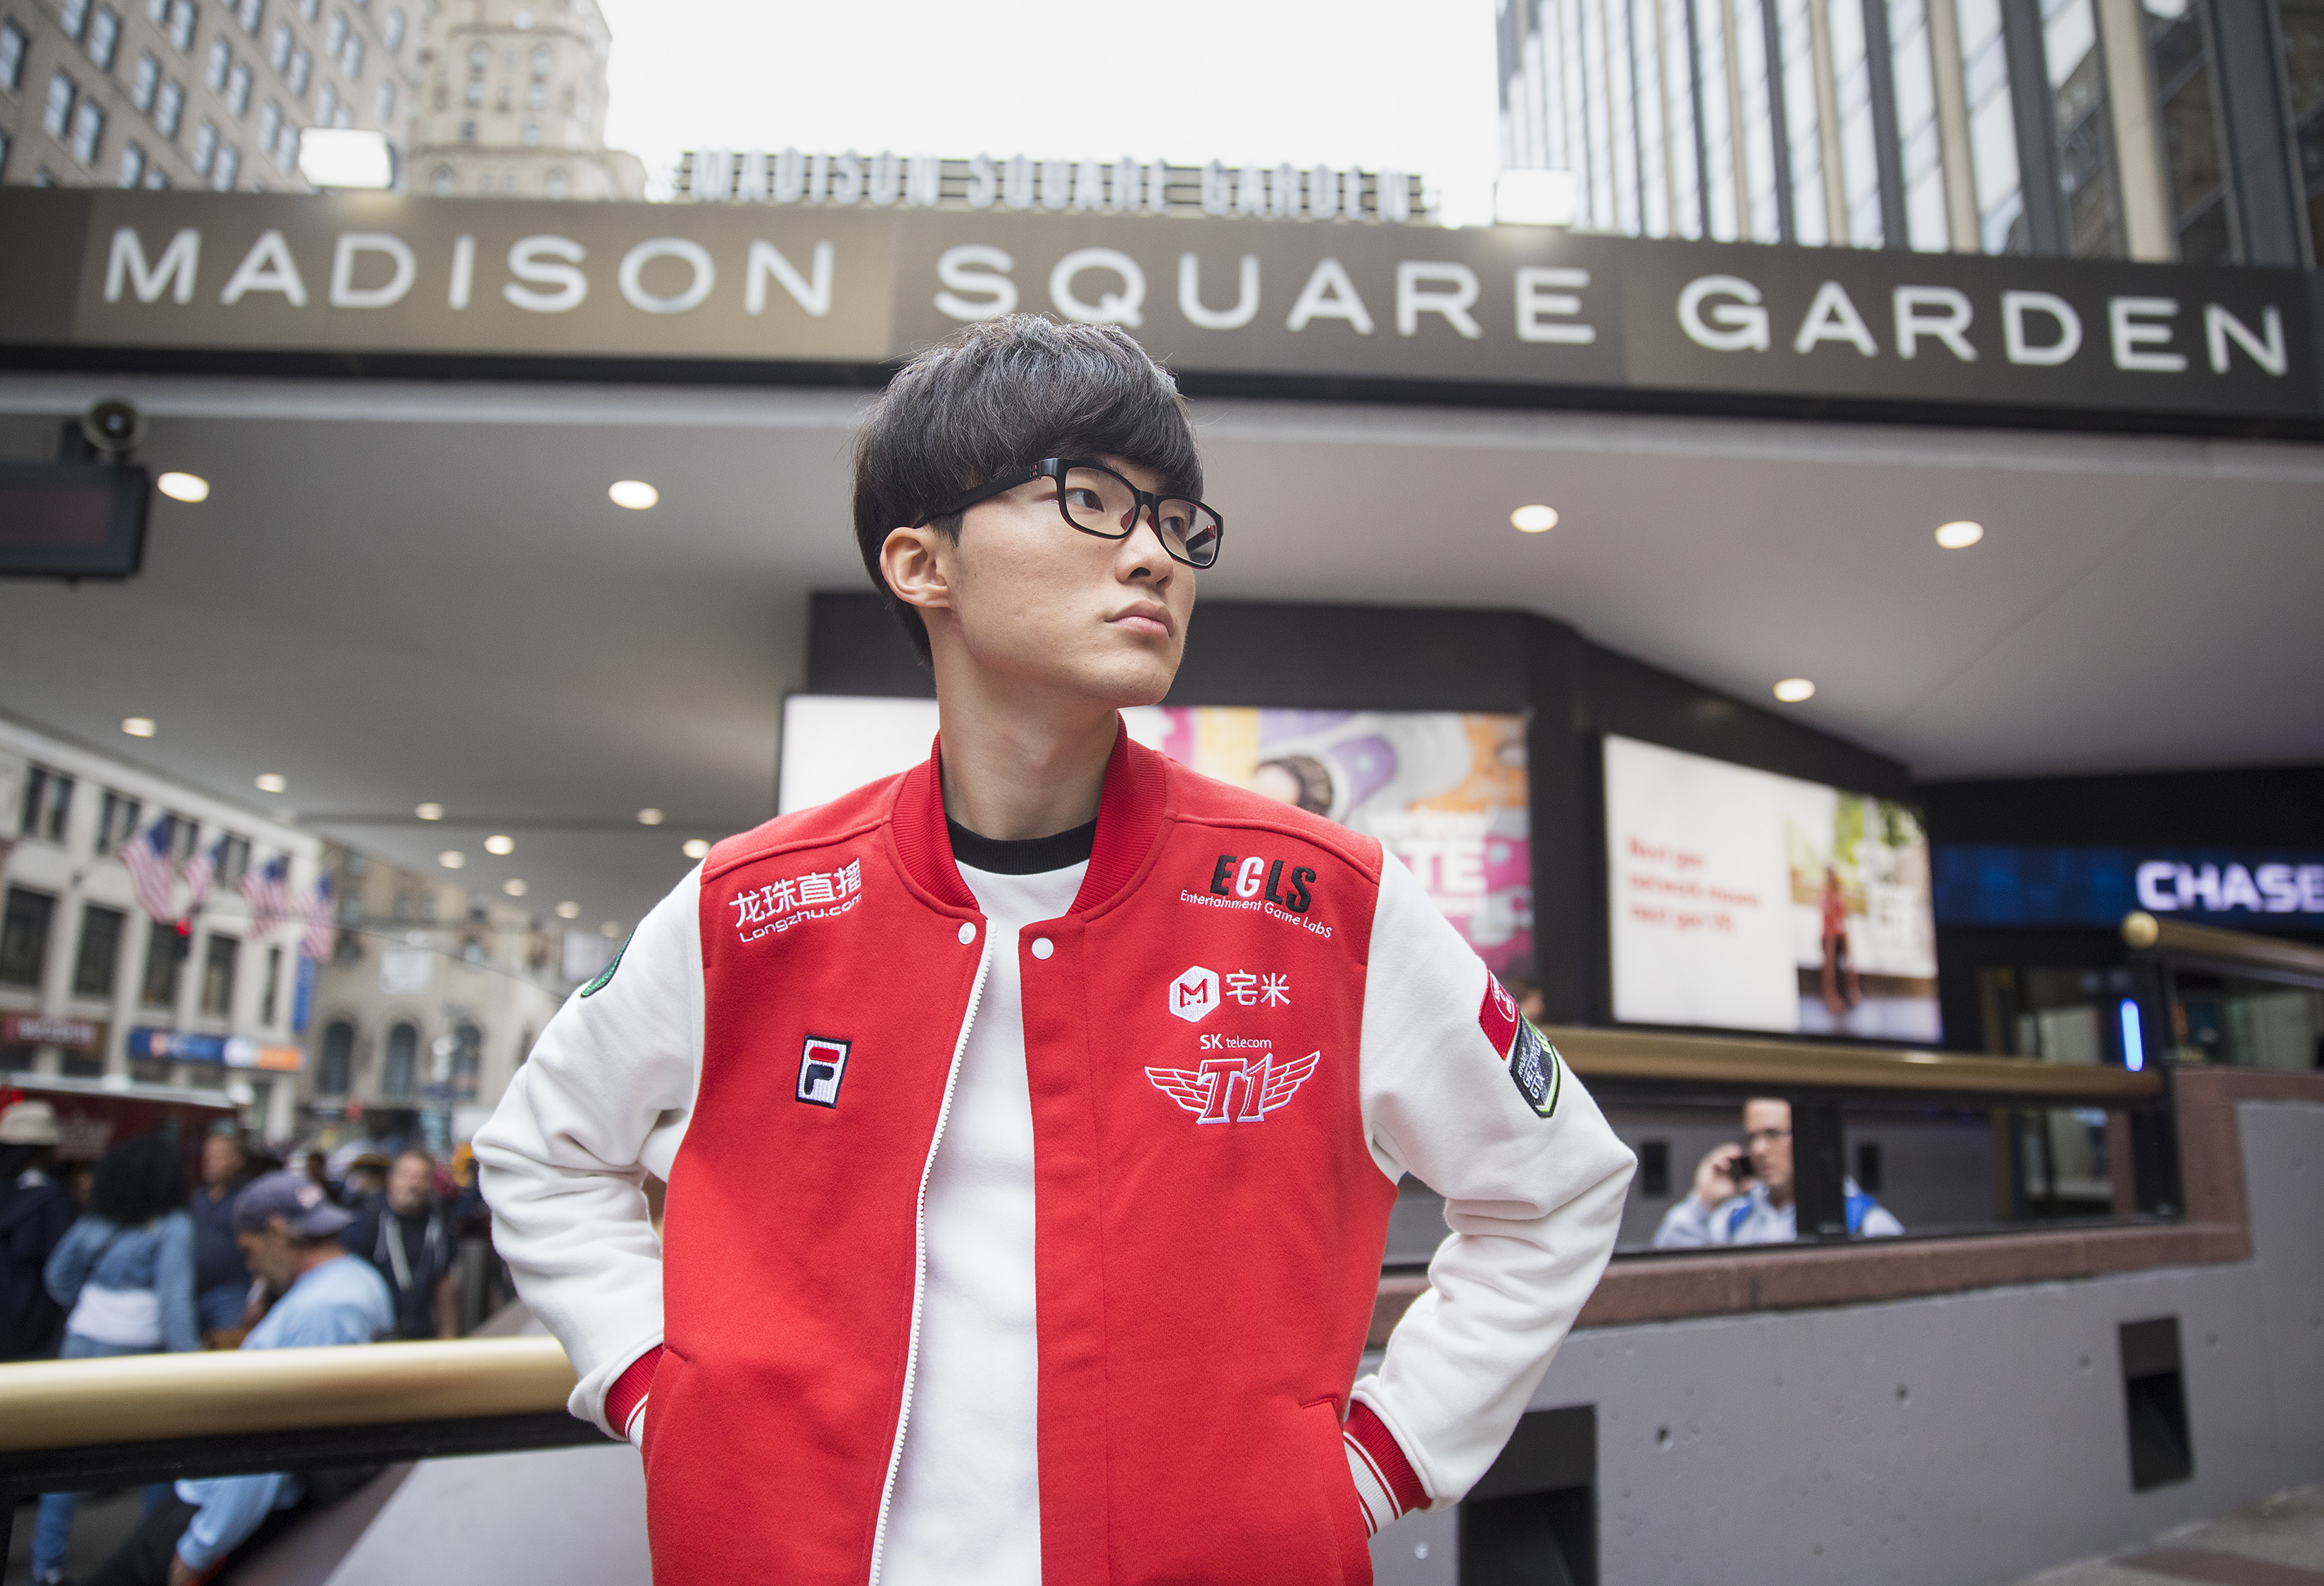 Meet Faker, the enigmatic phenom who could become eSports' first